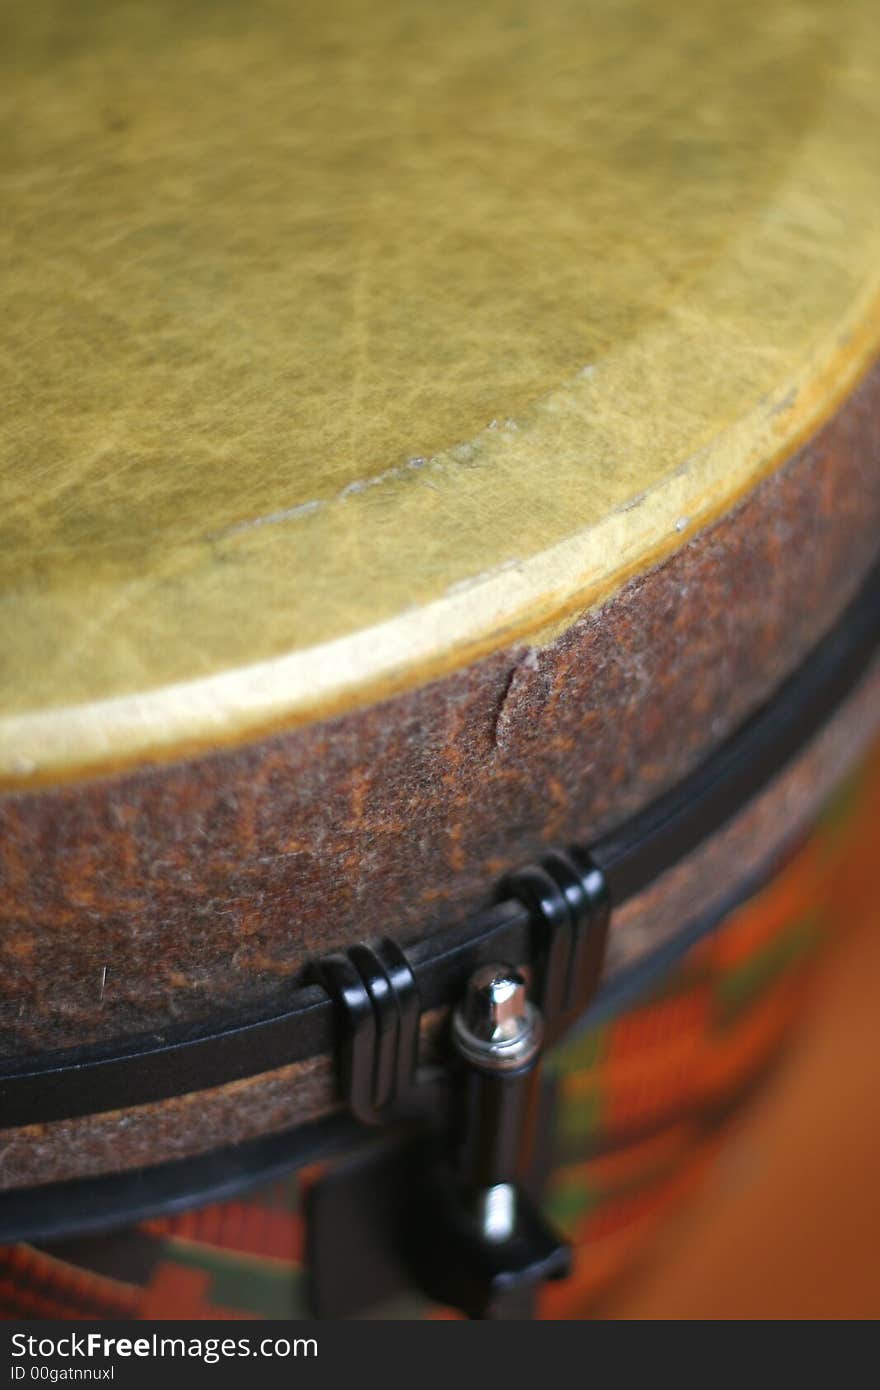 A close up of a Djembe's drum head. A close up of a Djembe's drum head